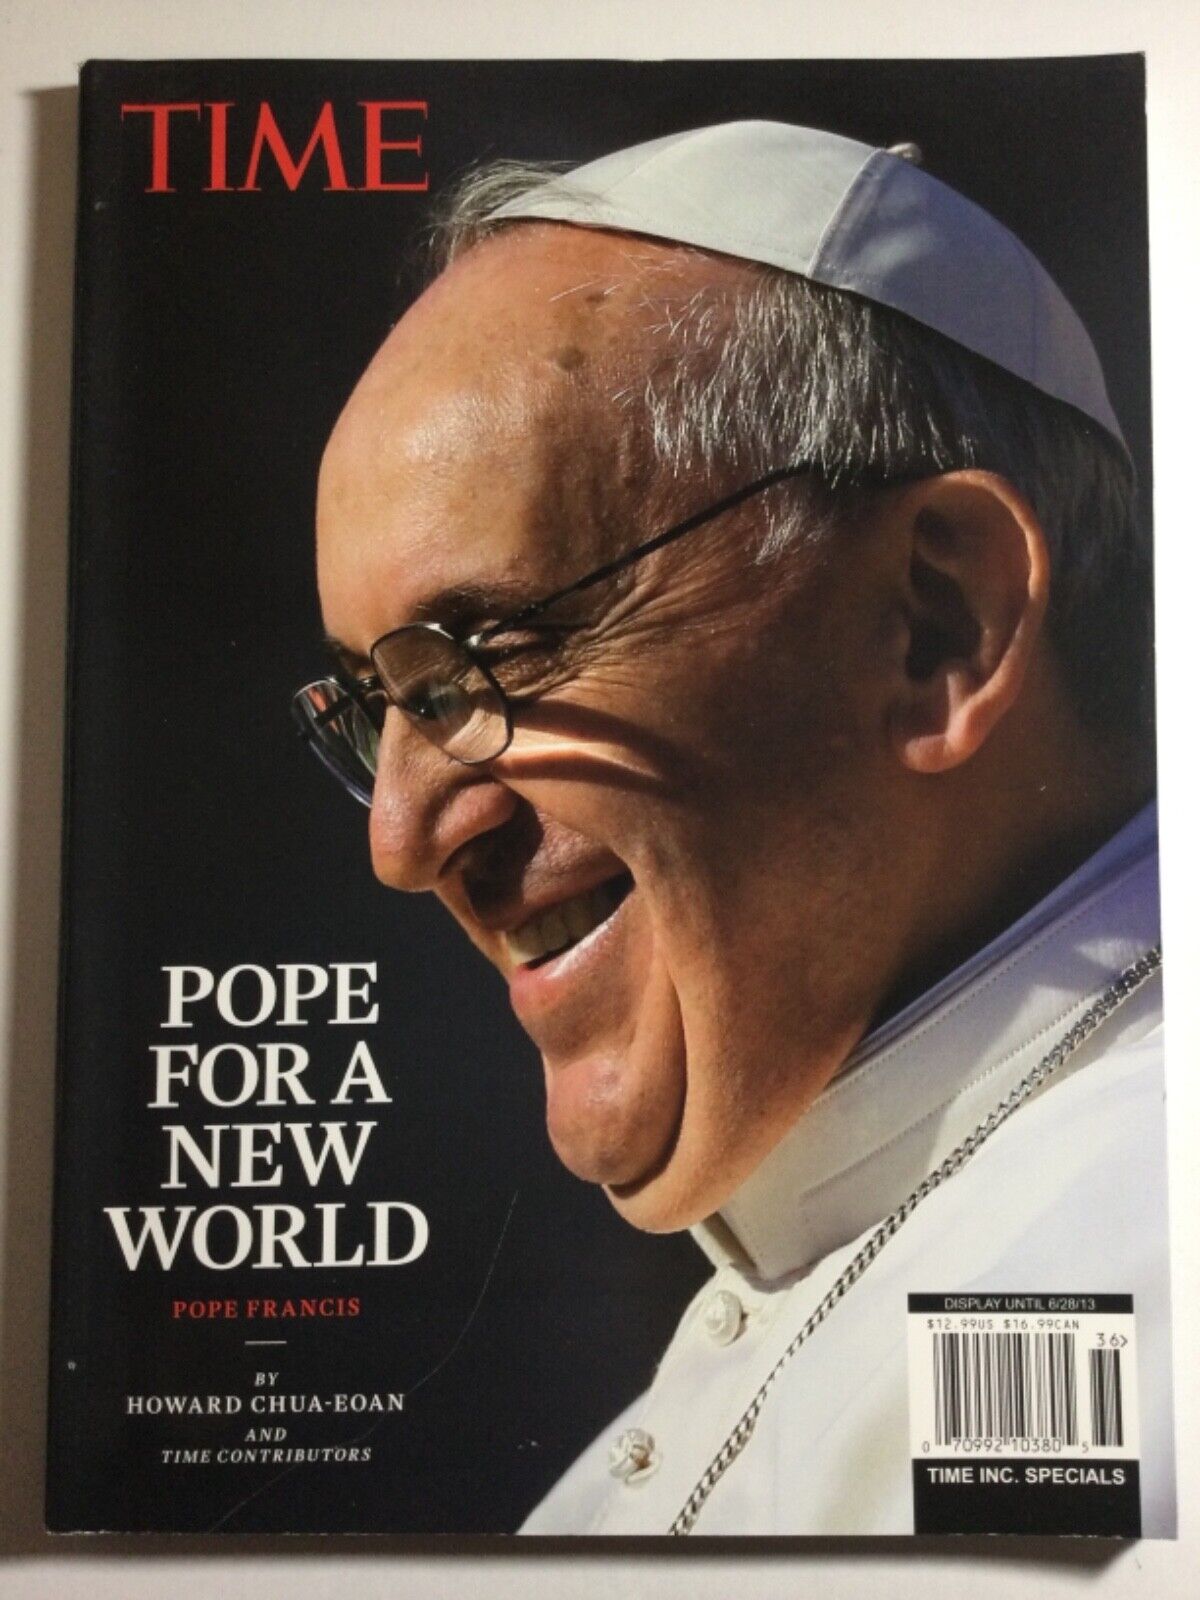 TIME MAGAZINE; POPE FOR A NEW WORLD: POPE FRANCIS BY. HOWARD CHUA-EOAN (2013) NM